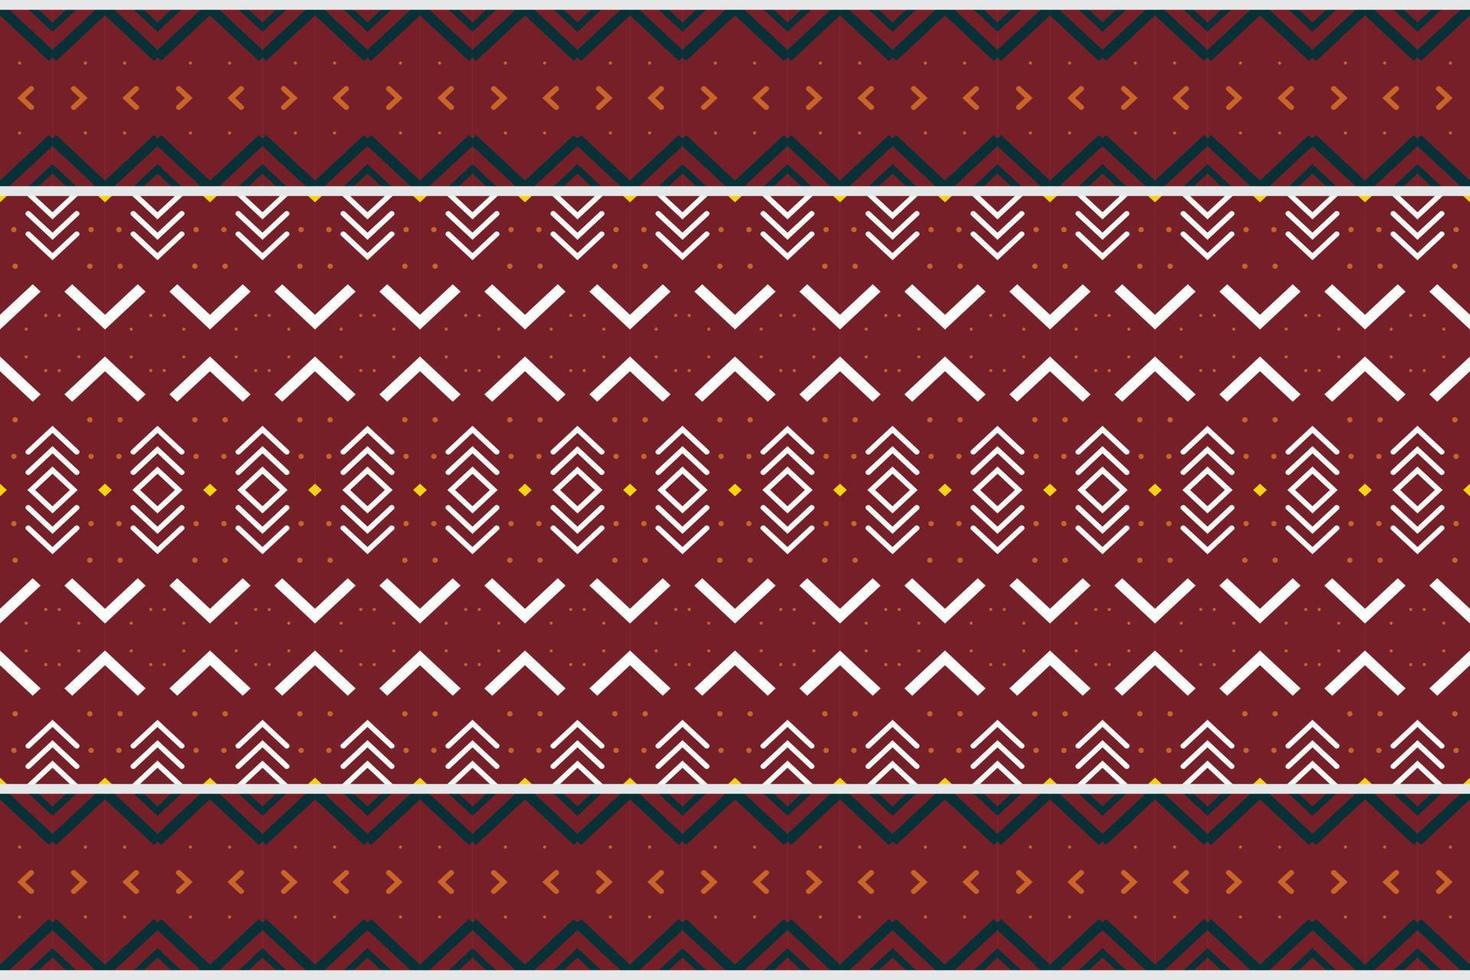 Simple ethnic design drawing. traditional patterned wallpaper It